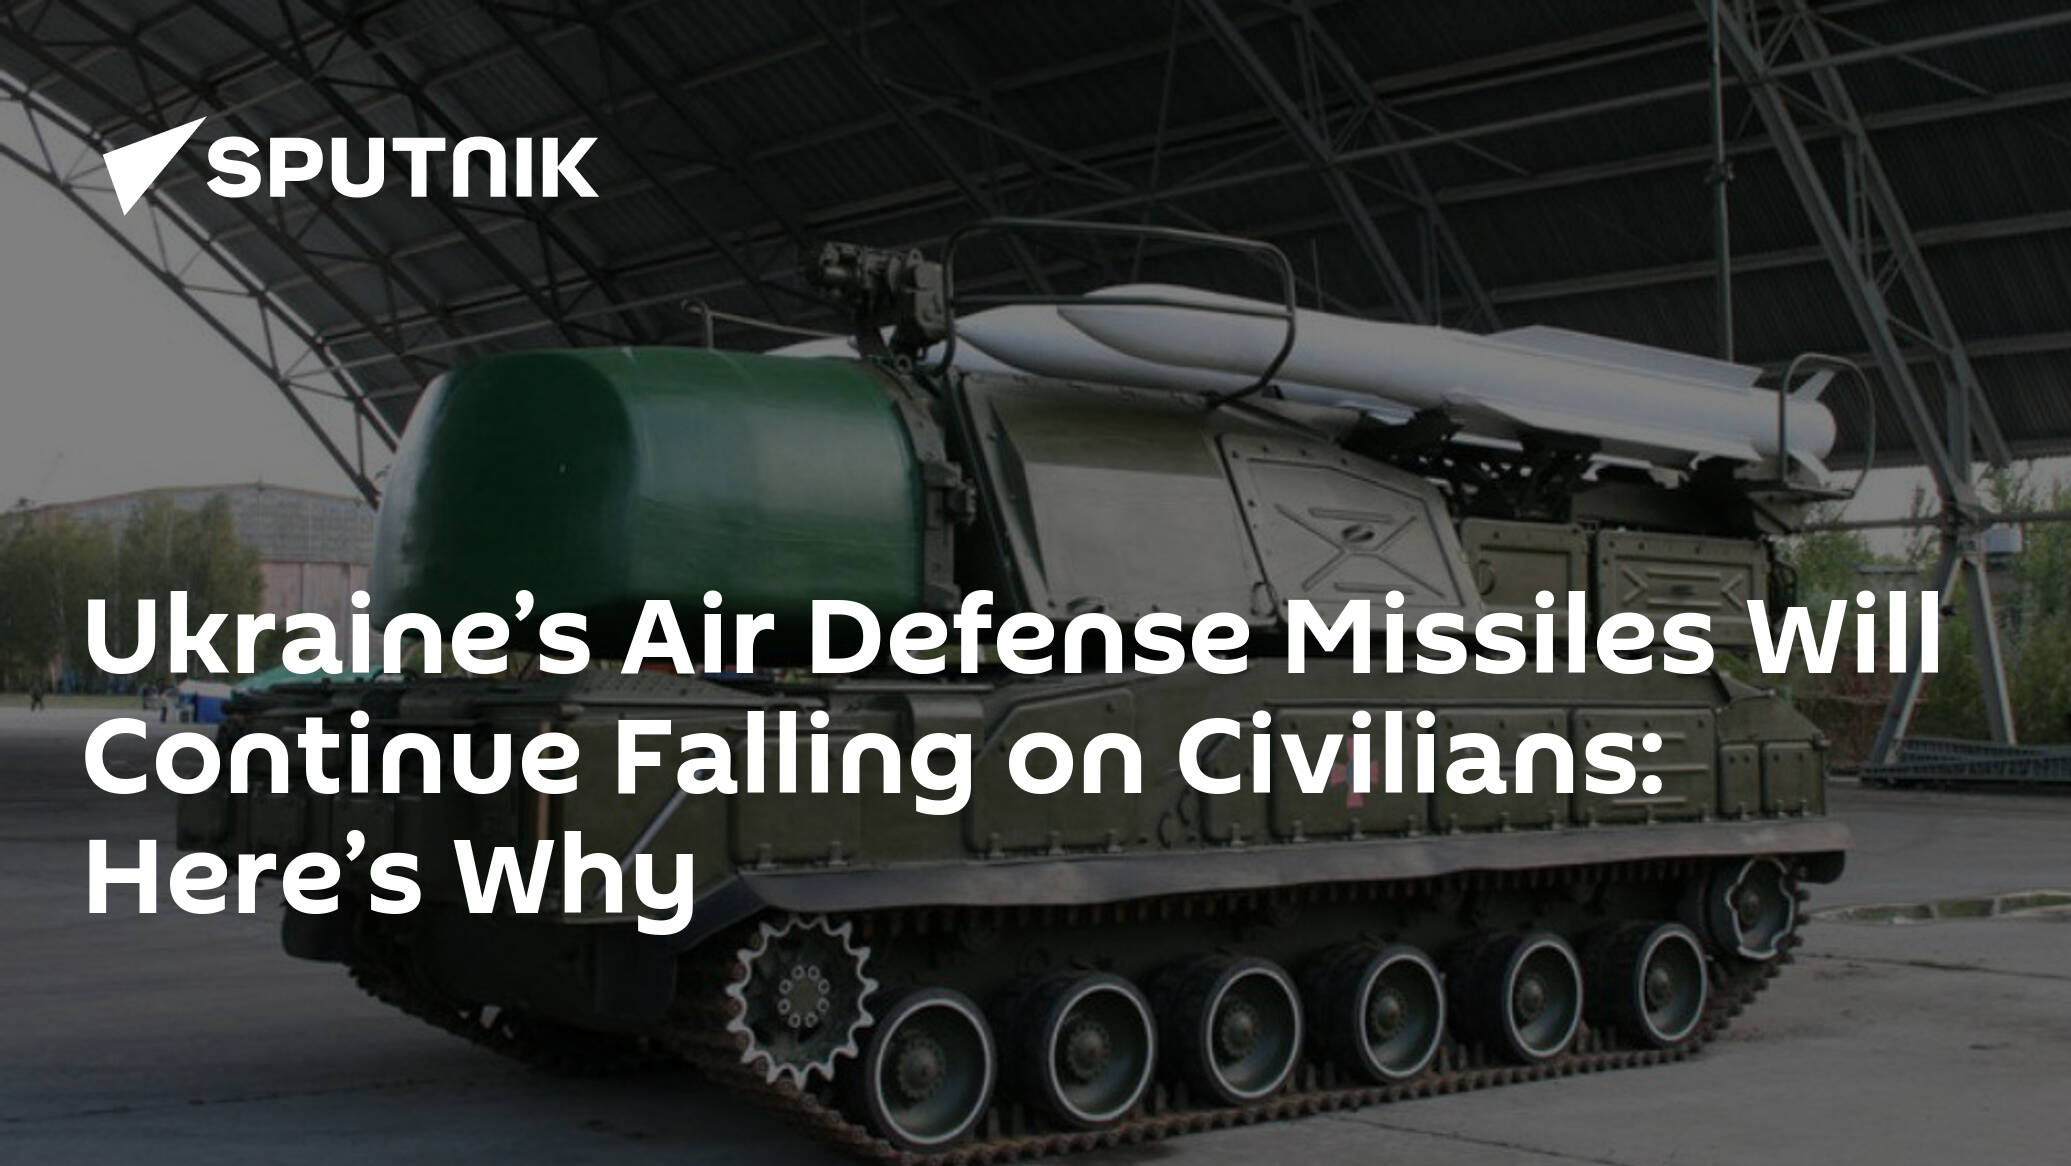 Ukraine’s Air Defense Missiles Will Continue Falling on Civilians: Here’s Why